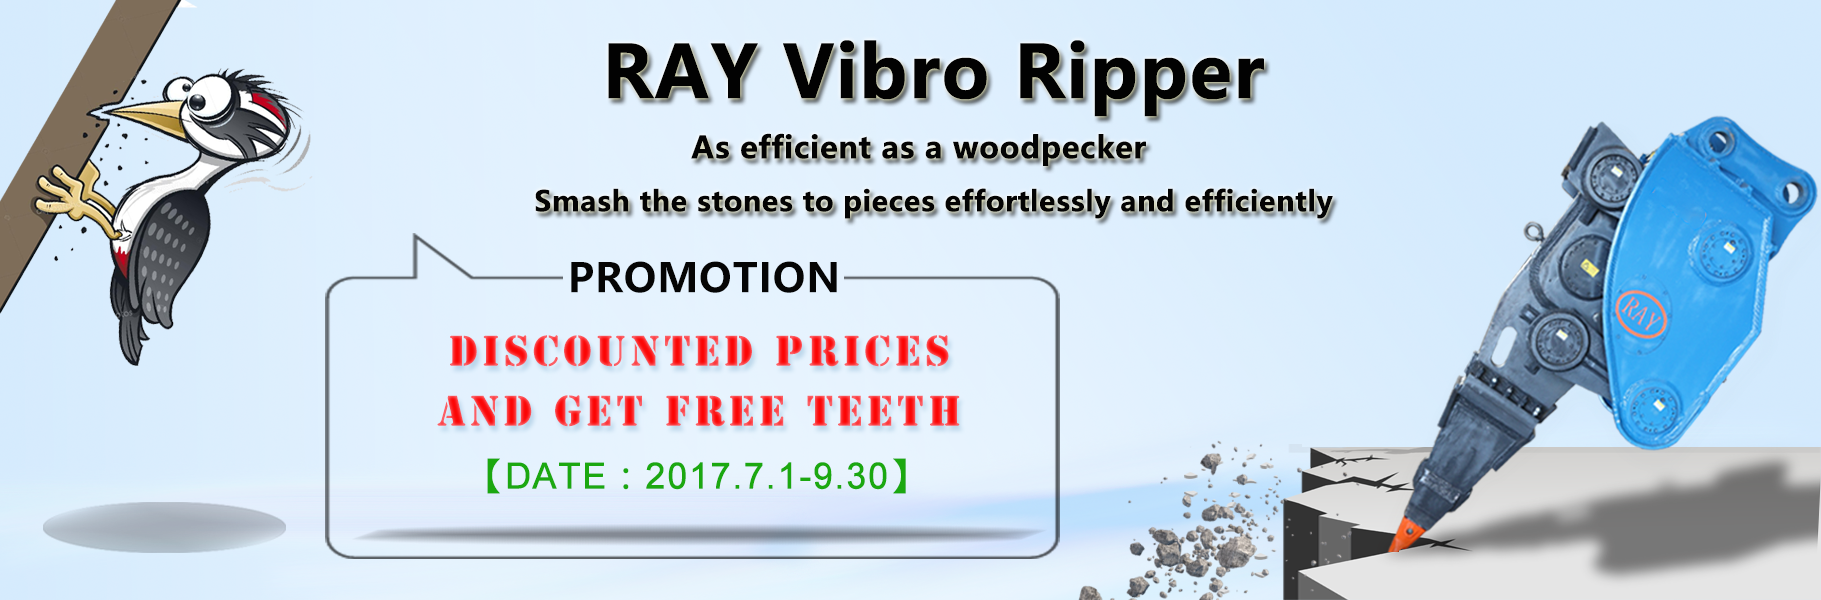 vibro ripper promotion.png